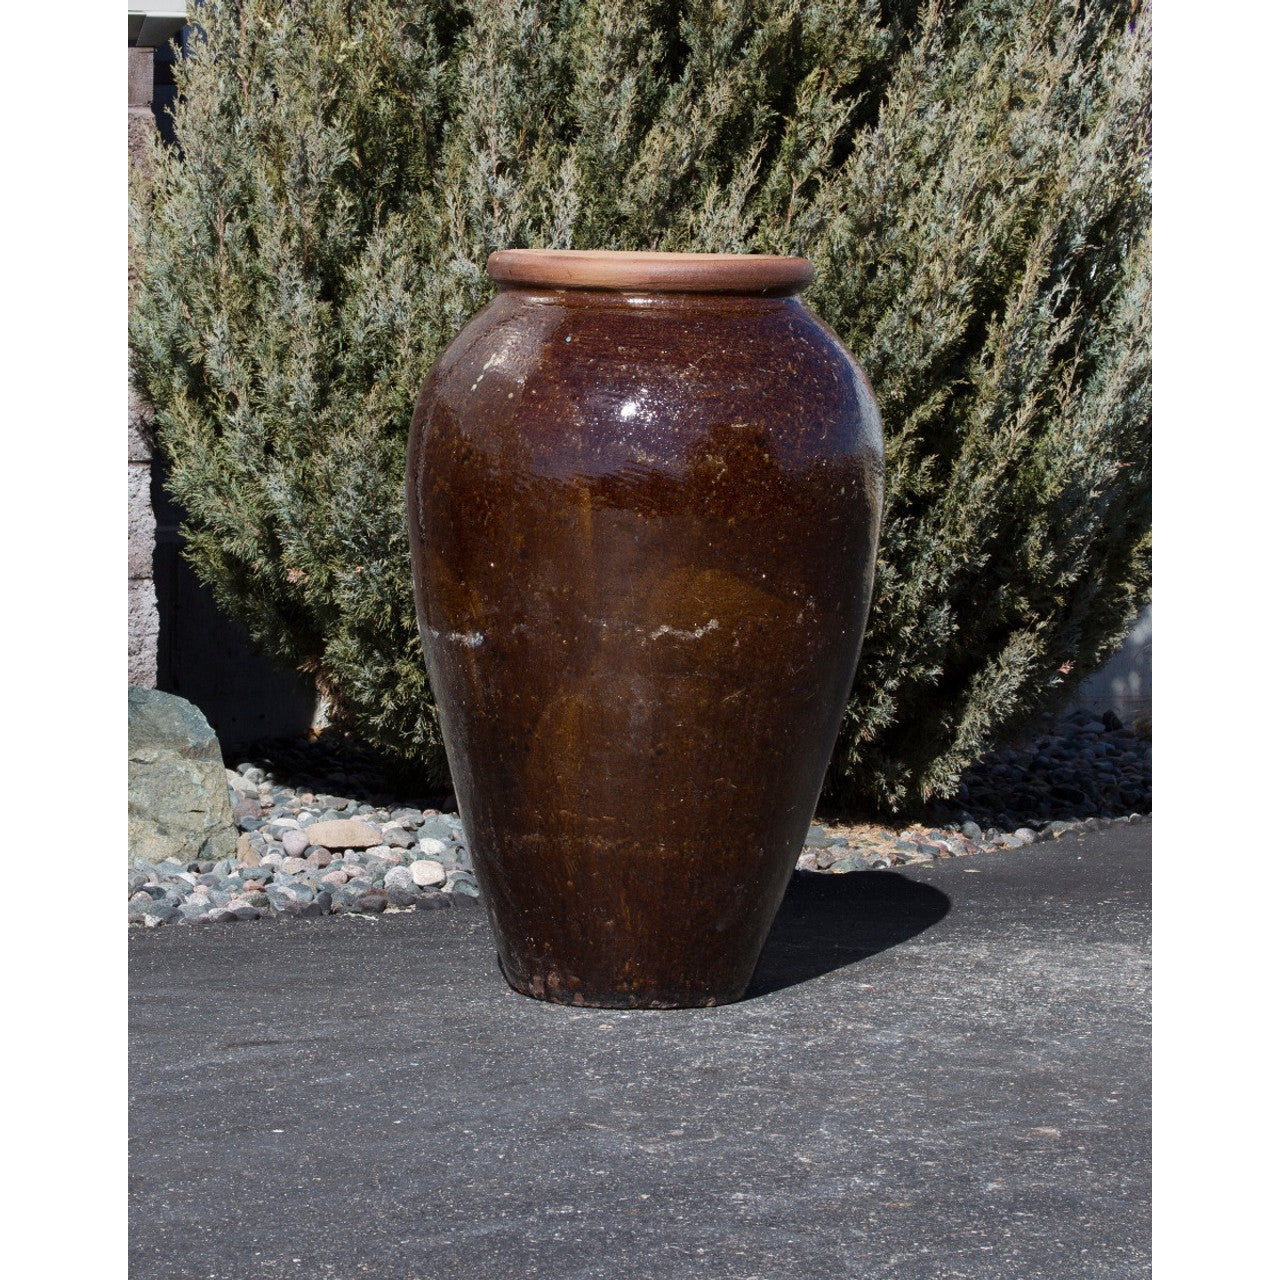 Cedar Tuscany Vase Fountain Kit - FNT40570 - Majestic Fountains and More